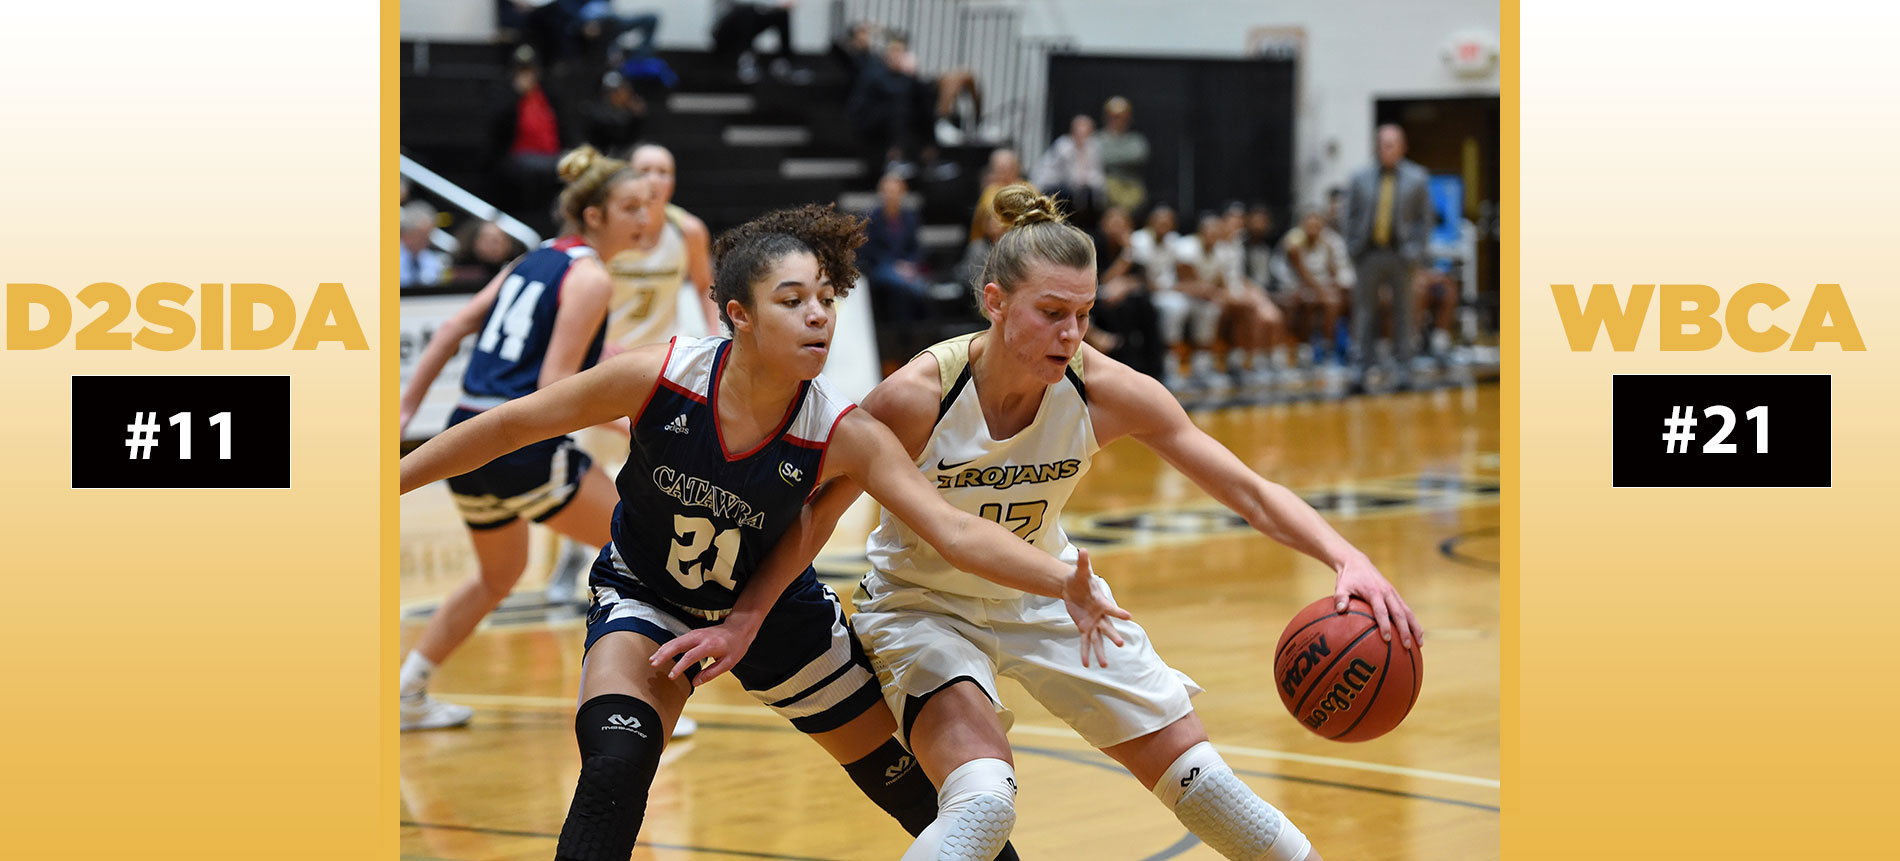 Women’s Basketball Moves Up to No.11 in D2SIDA National Poll; Remains No. 21 in the WBCA